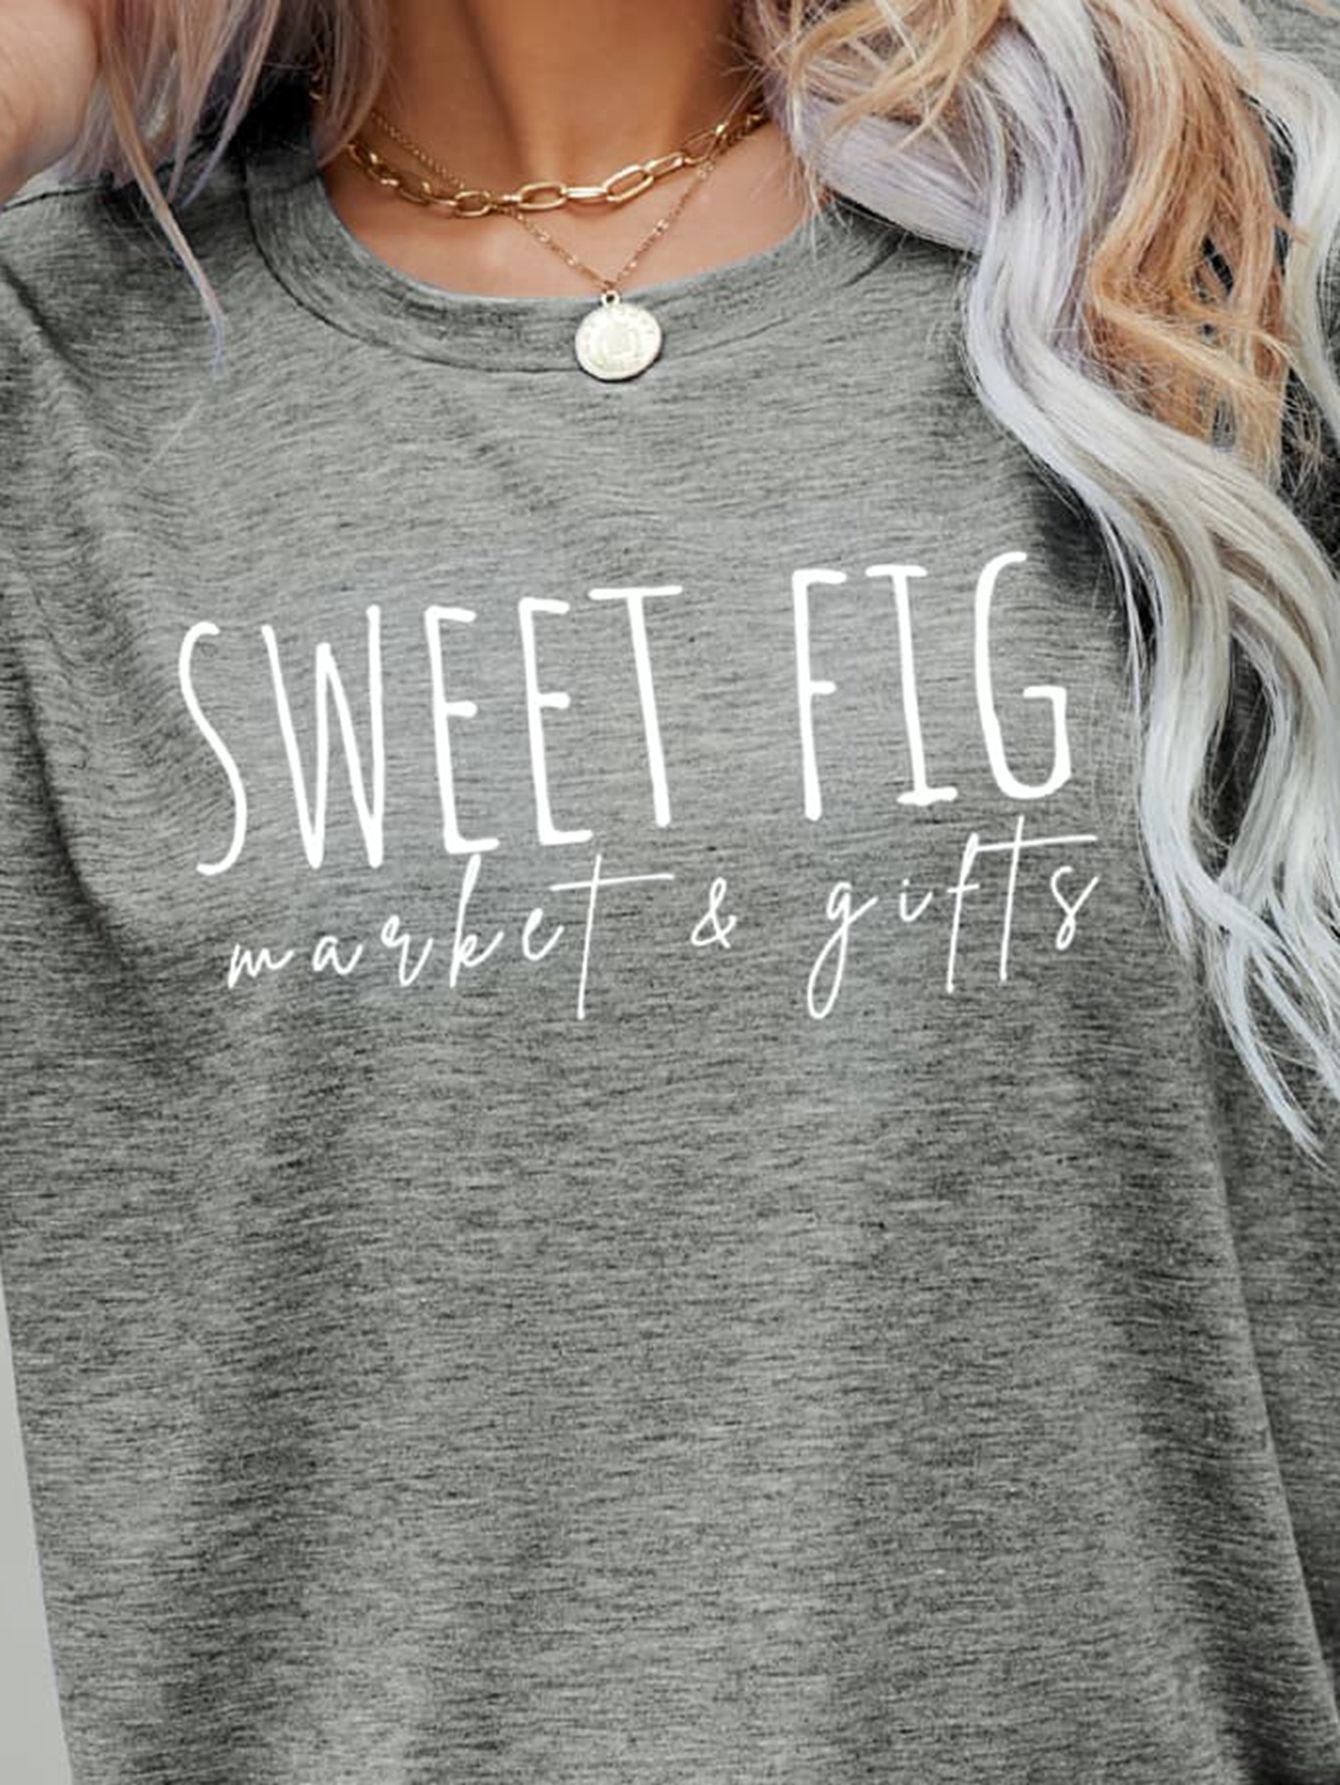 Light Slate Gray SWEET FIG MARKET & GIFTS Graphic Tee Tops